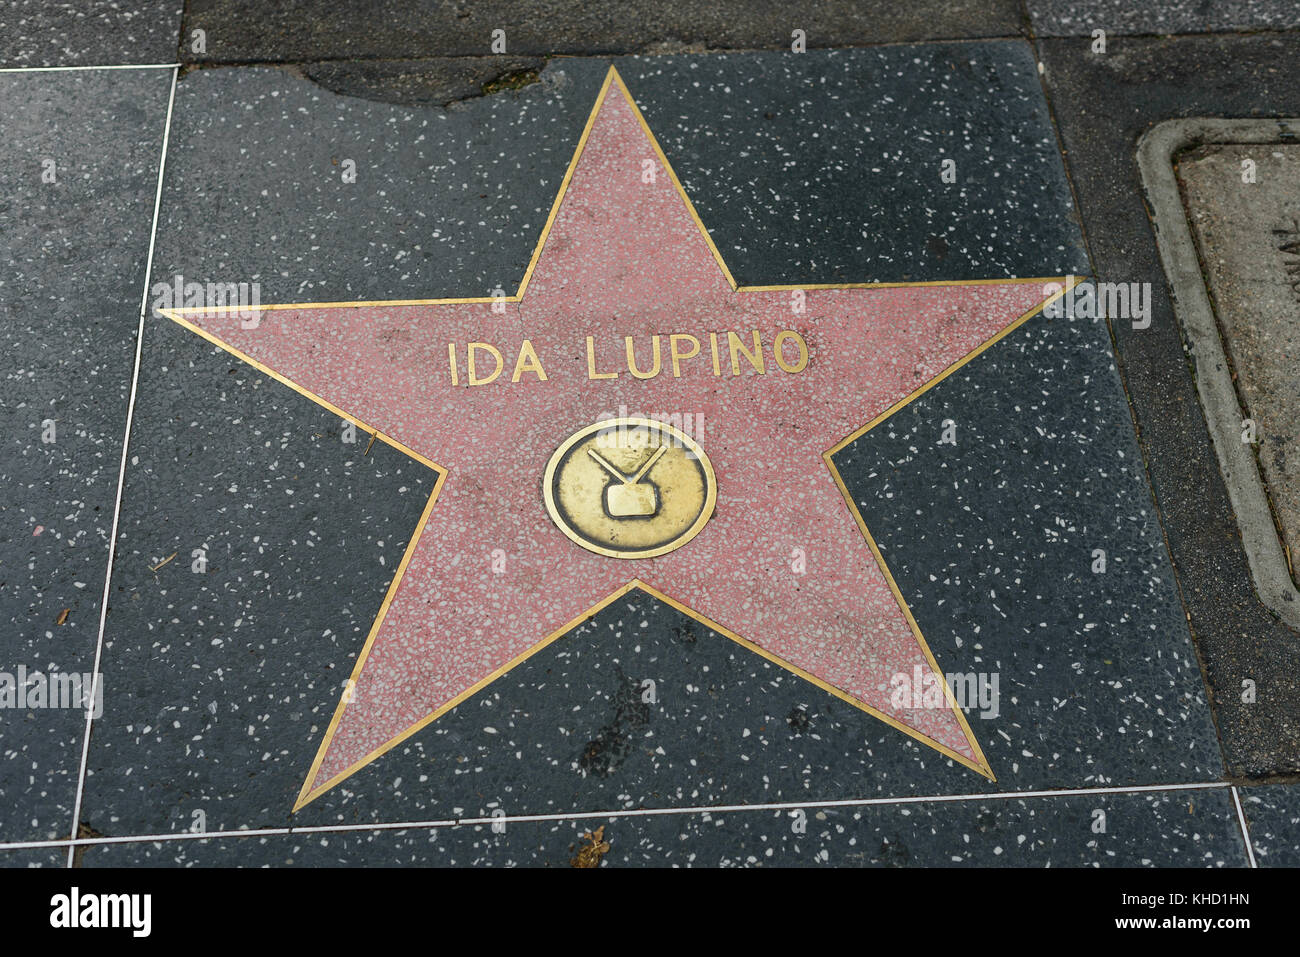 HOLLYWOOD, CA - DECEMBER 06: Ida Lupino star on the Hollywood Walk of Fame in Hollywood, California on Dec. 6, 2016. Stock Photo